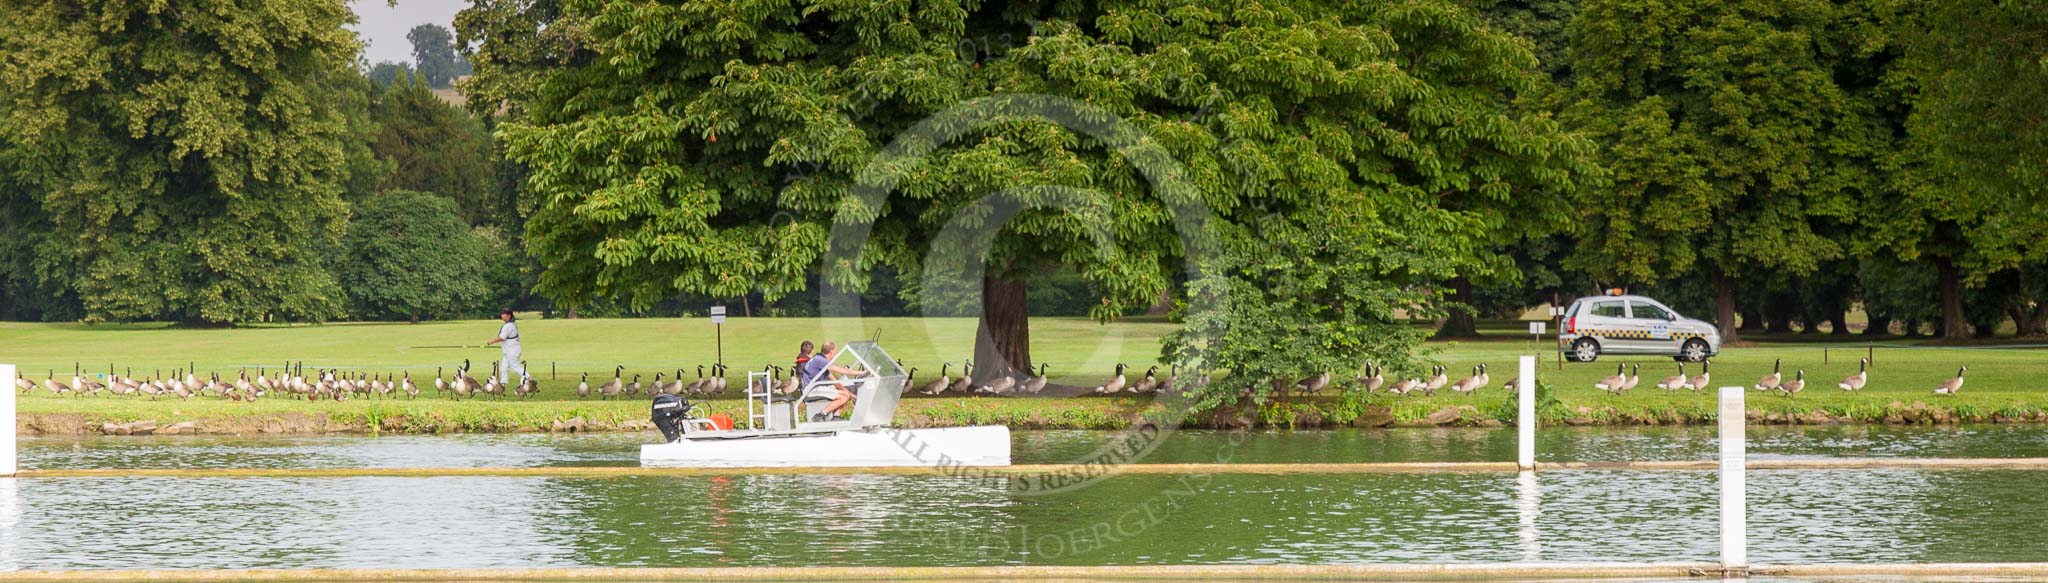 Henley Royal Regatta 2013, Saturday: A flock of Canadian Geese is gently motivated to spend the day further away from the Henley Royal Regatta race course. Image #2, 06 July 2013 08:25 River Thames, Henley on Thames, UK